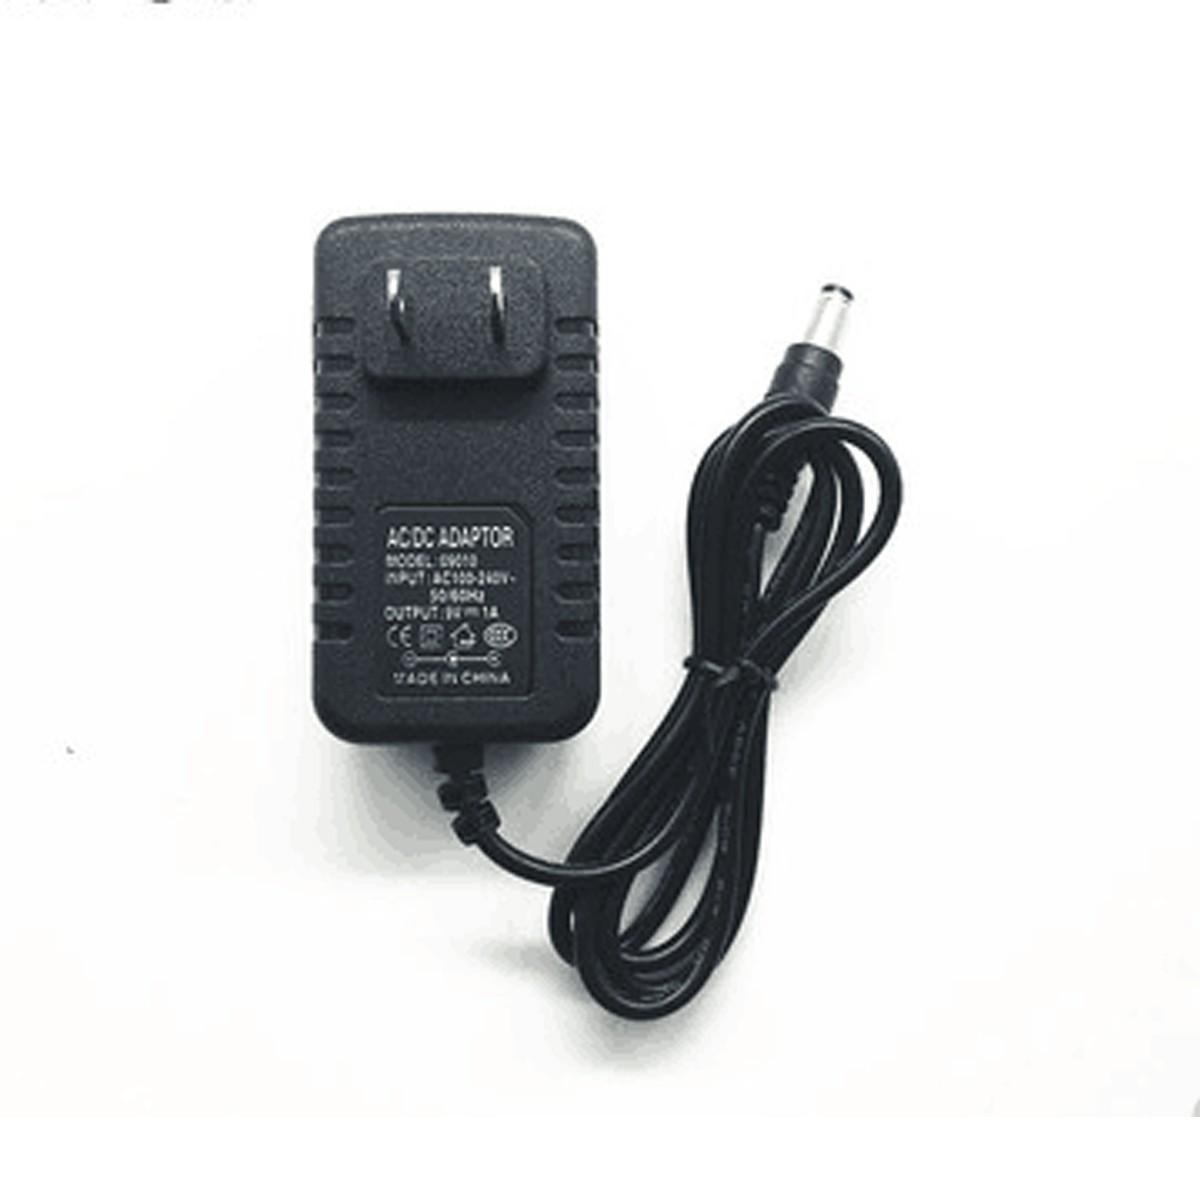 New Compatible adapter for Honeywell 4820 4820i 3820 3820i 9V 0.